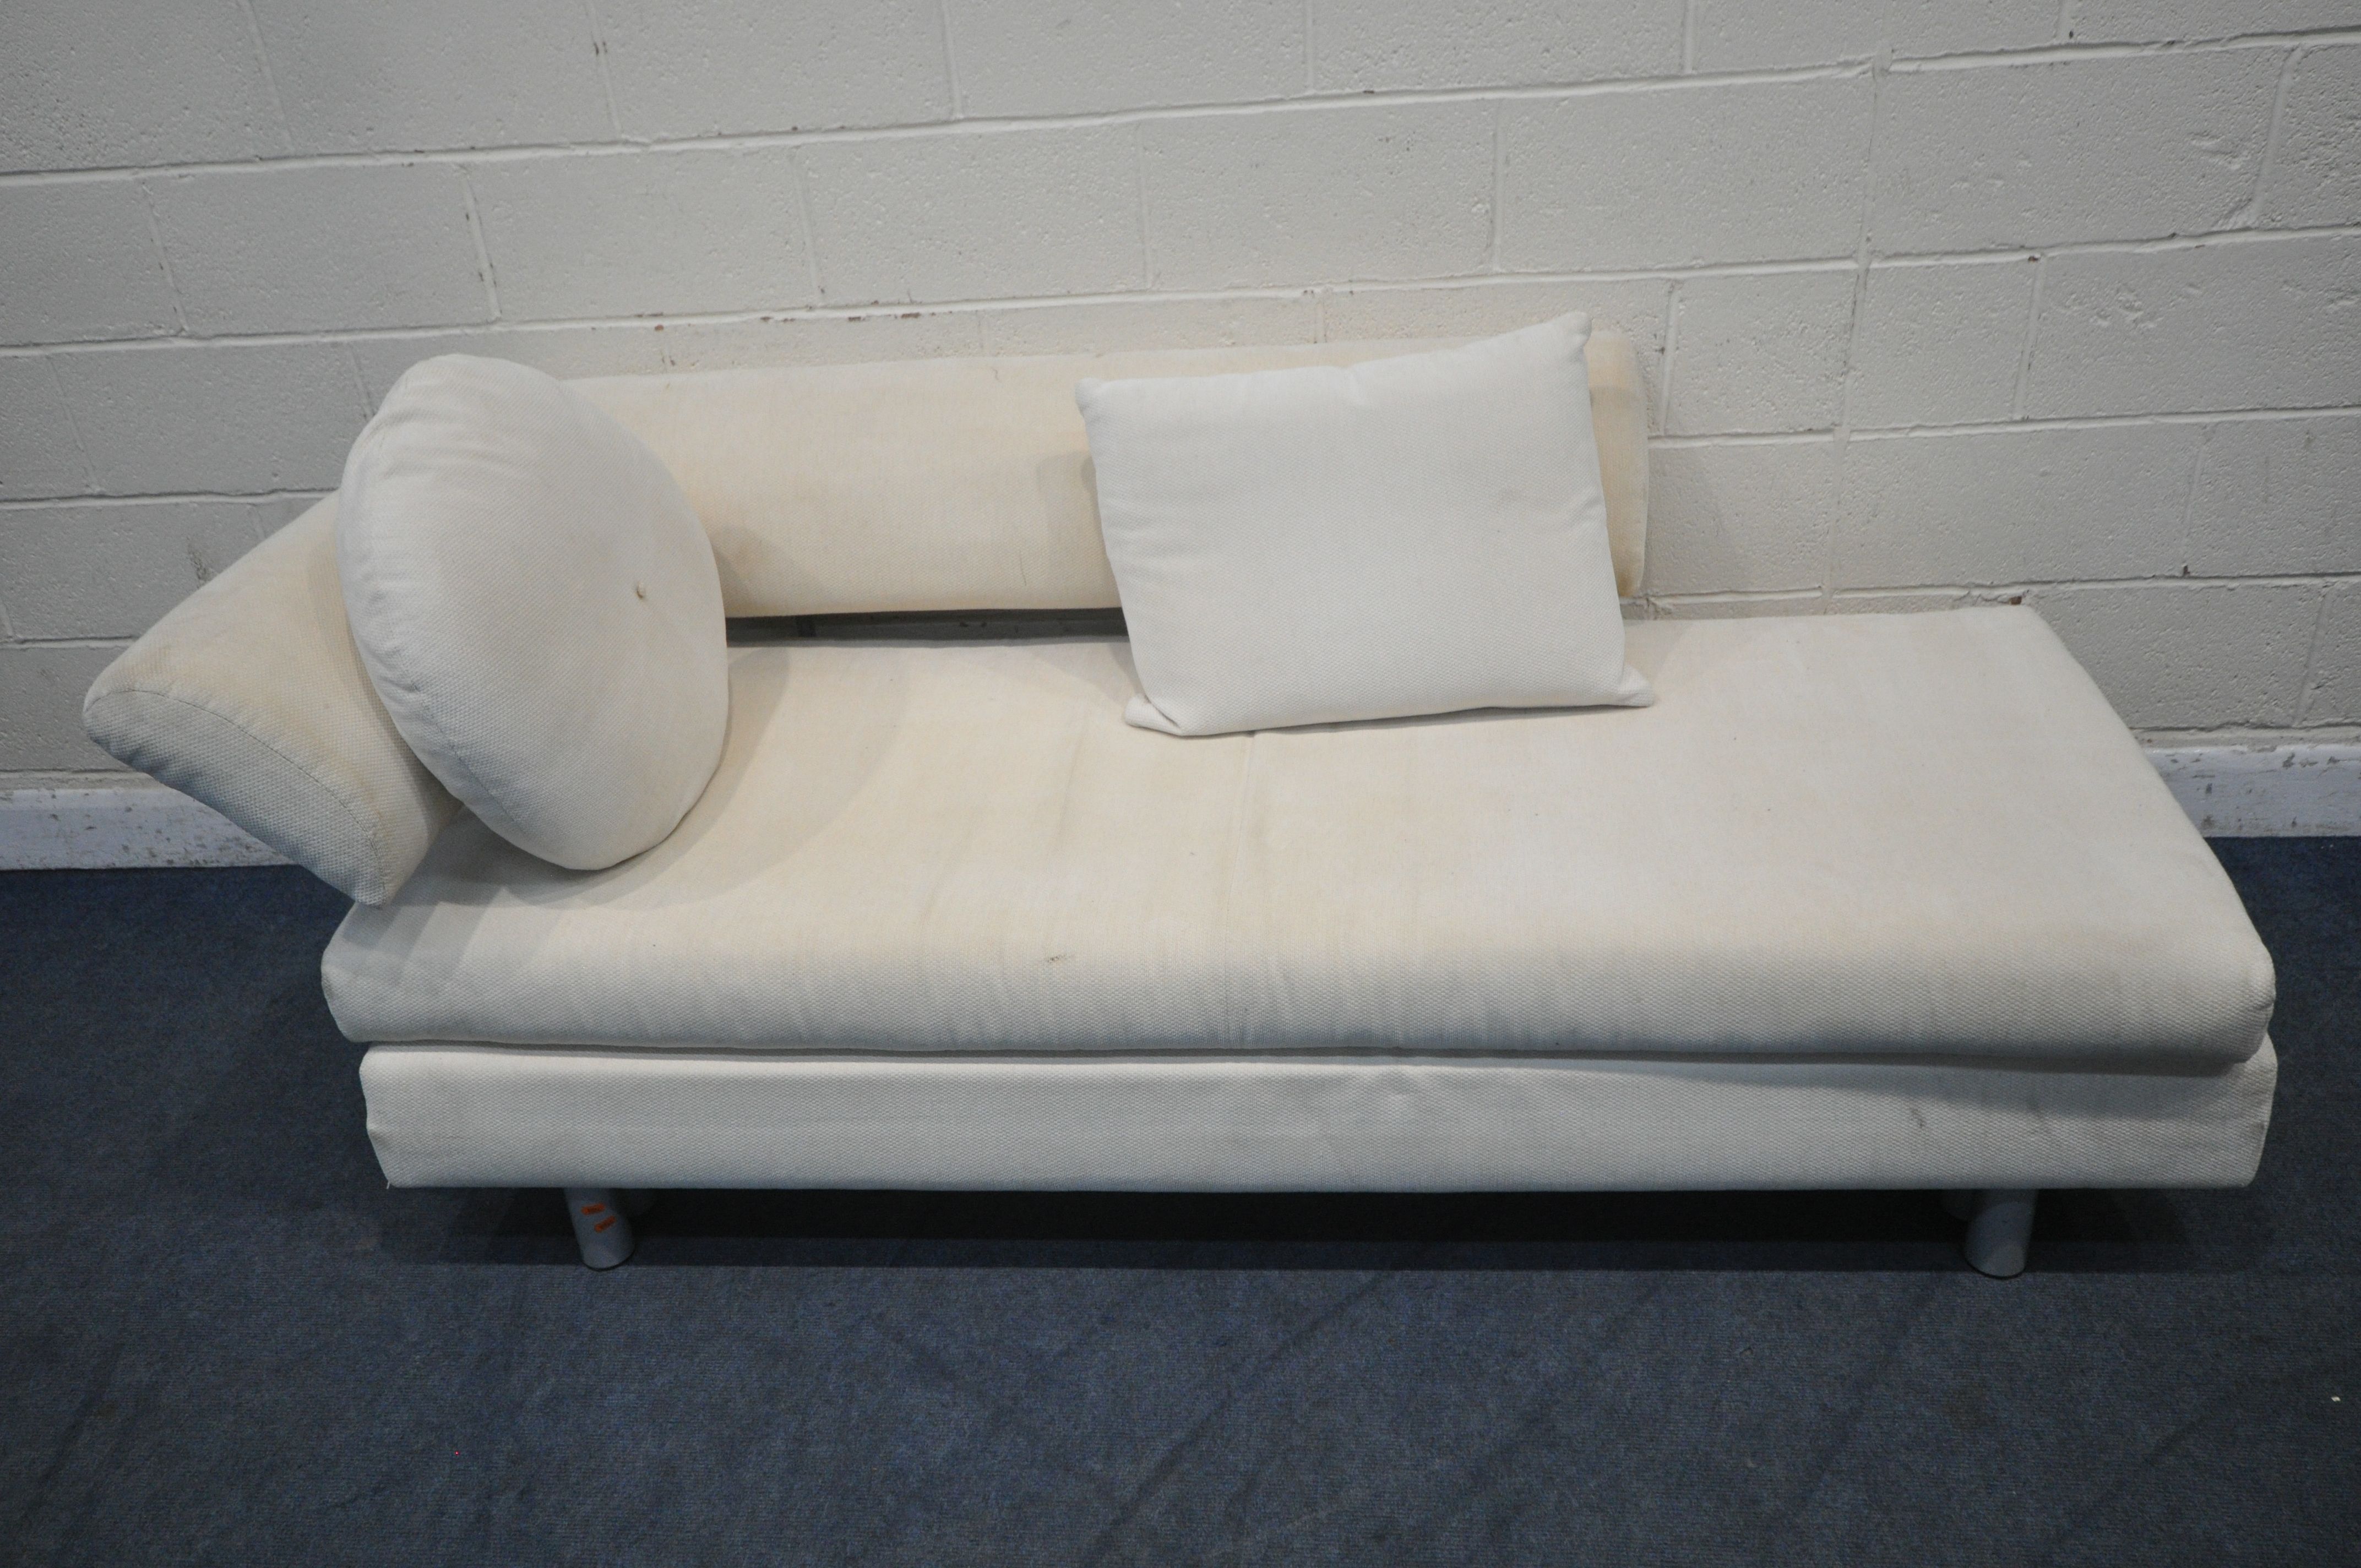 A MODERN CHAISE LOUNGE / DAYBED, length approximately 204cm x depth 99cm x height 80cm (condition